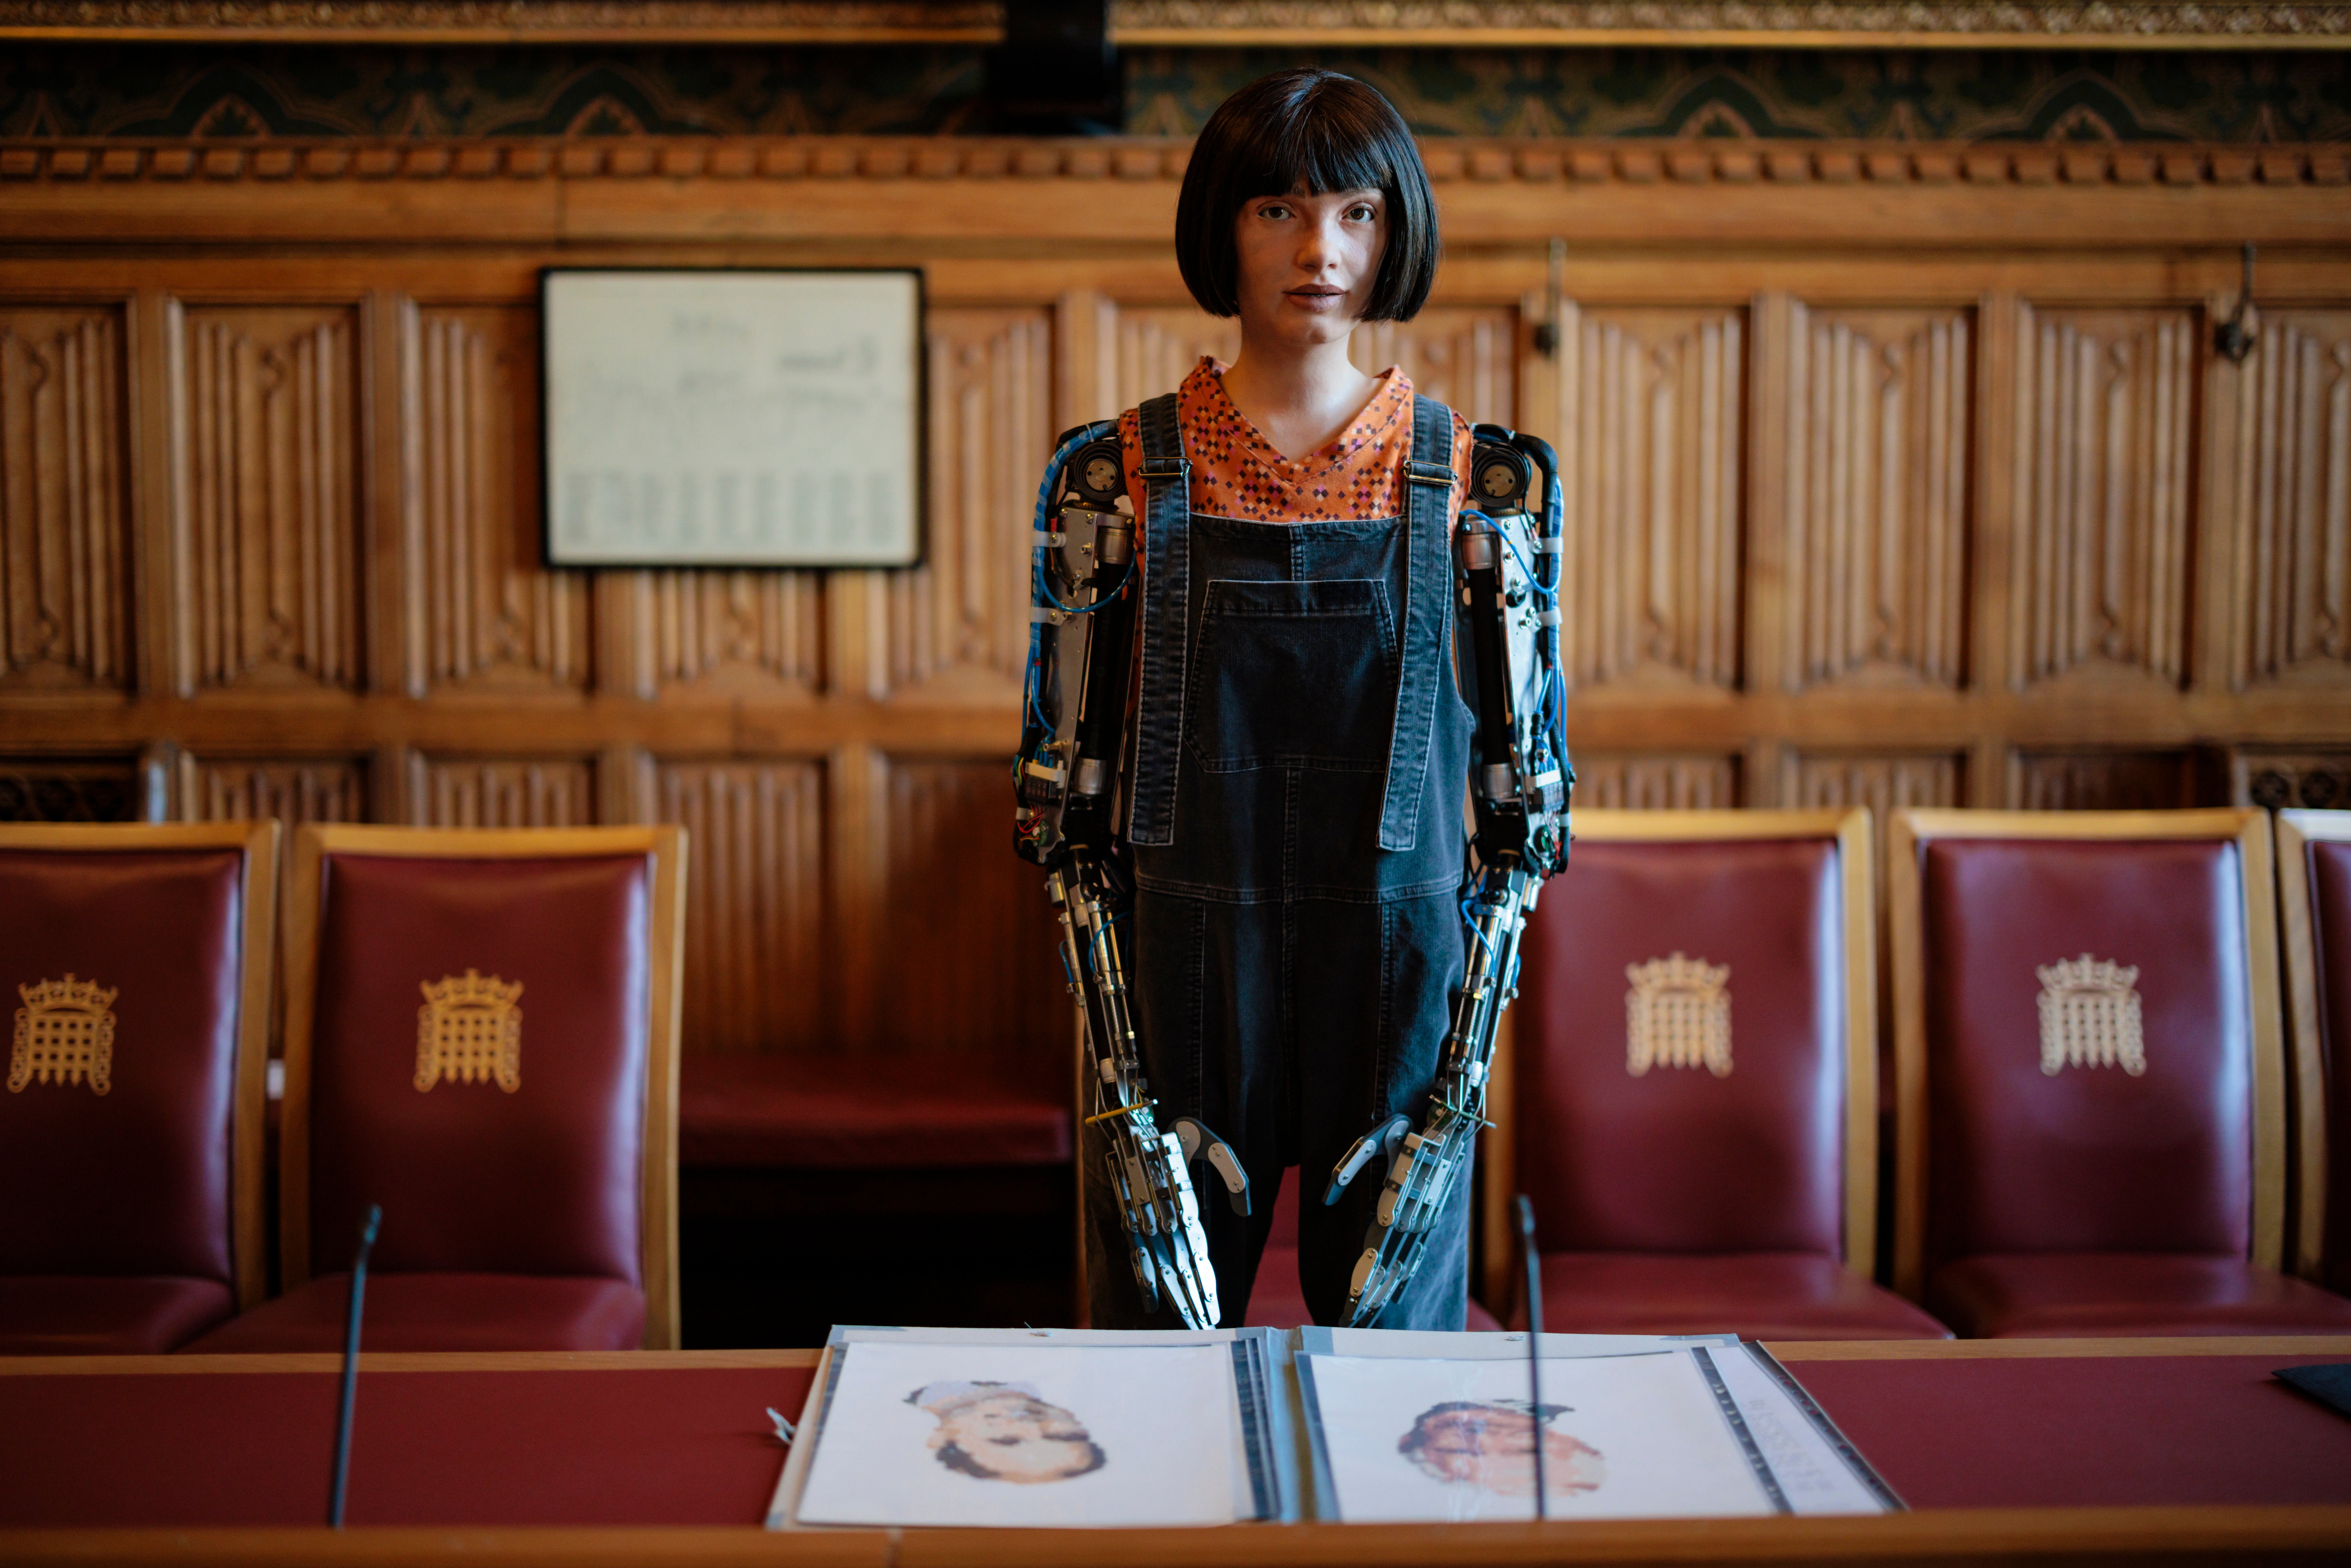 Ai-Da, the world's first hyper-realistic humanoid robot artist, to speak at the British House of Lords in 2022